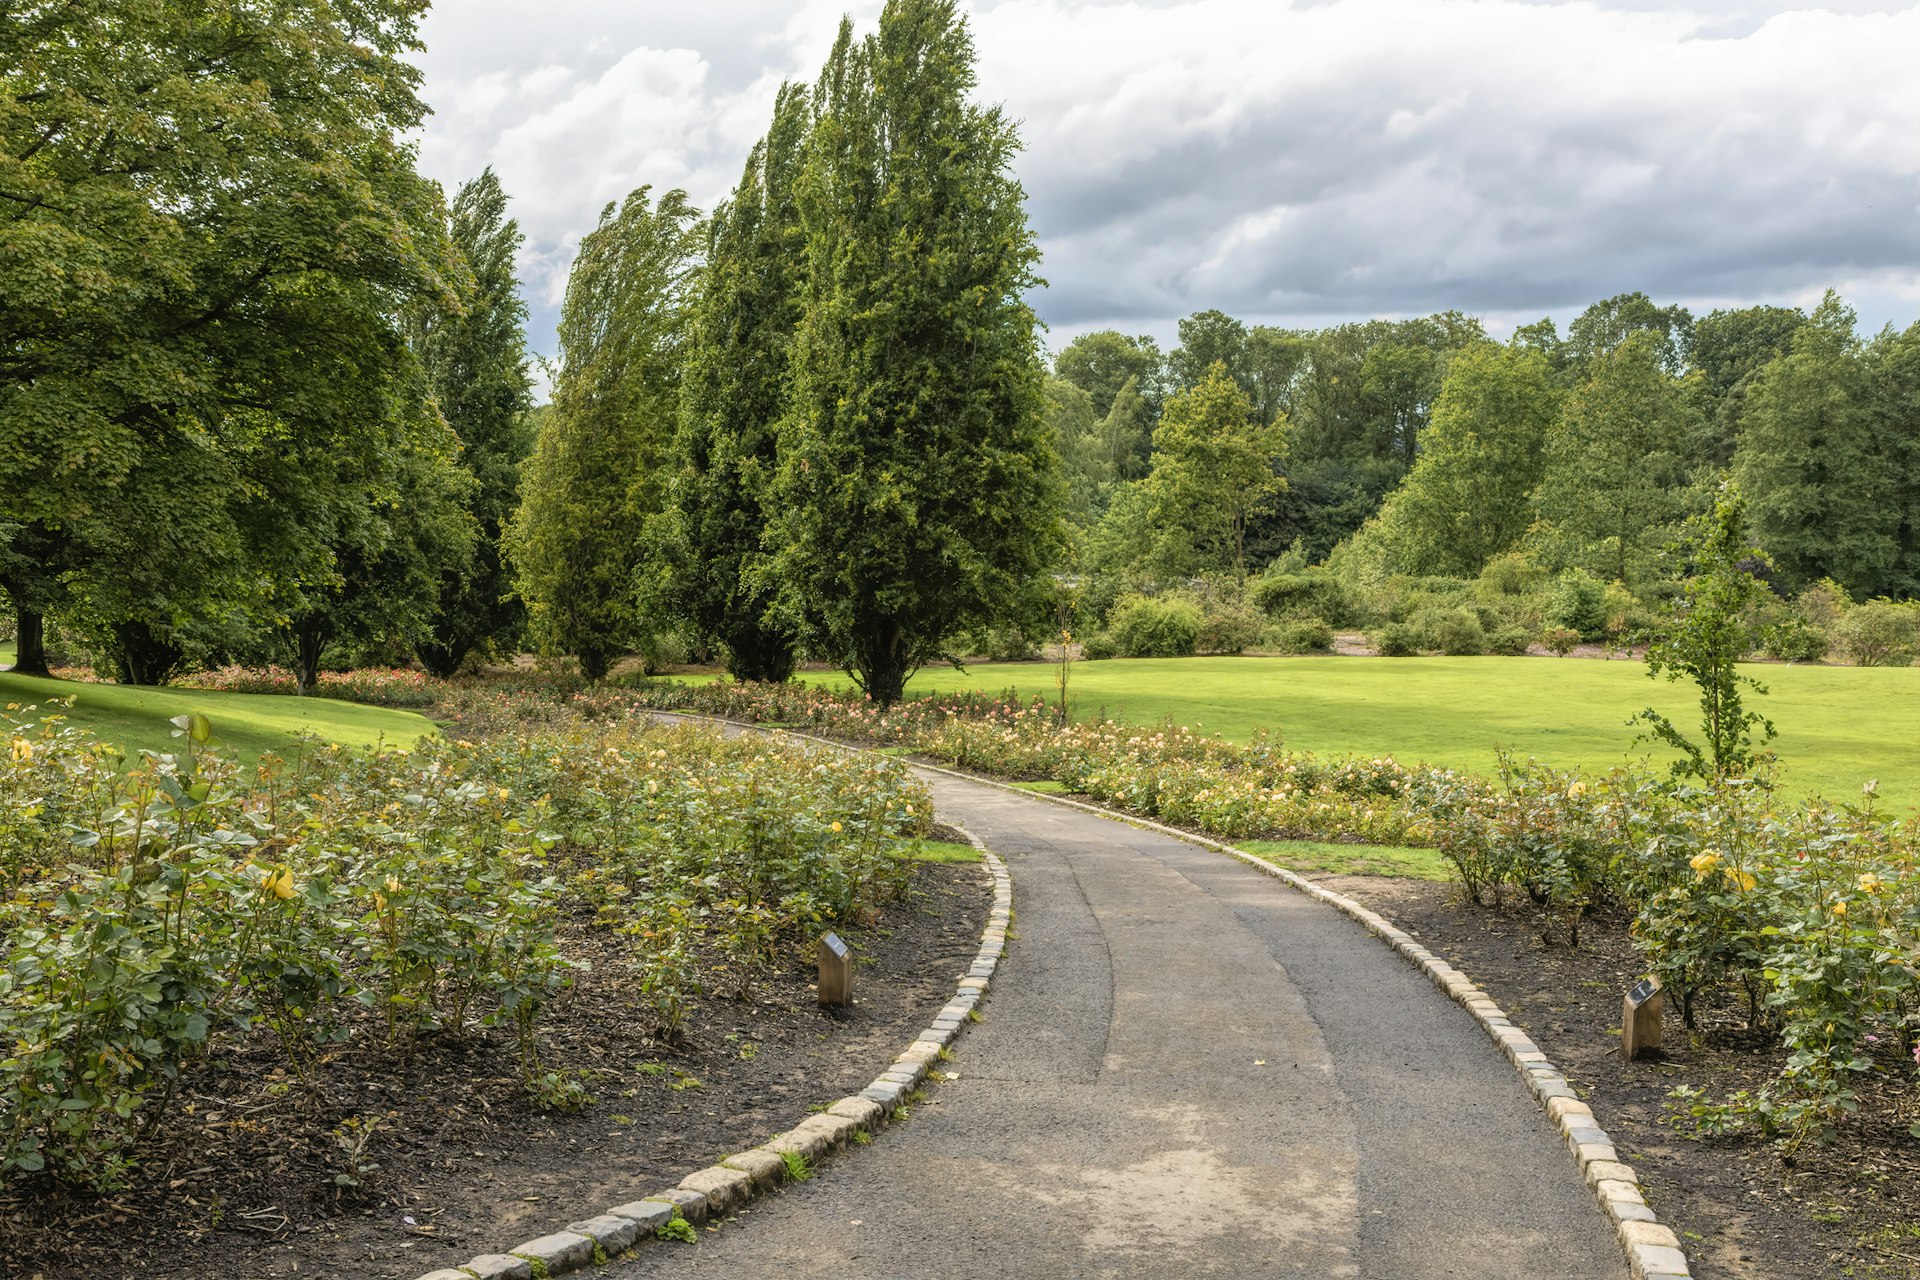 A concrete path curls around to the left between the Rose Gardens of Lady Dixon Park Park in Belfast with grass stretching out beyond them